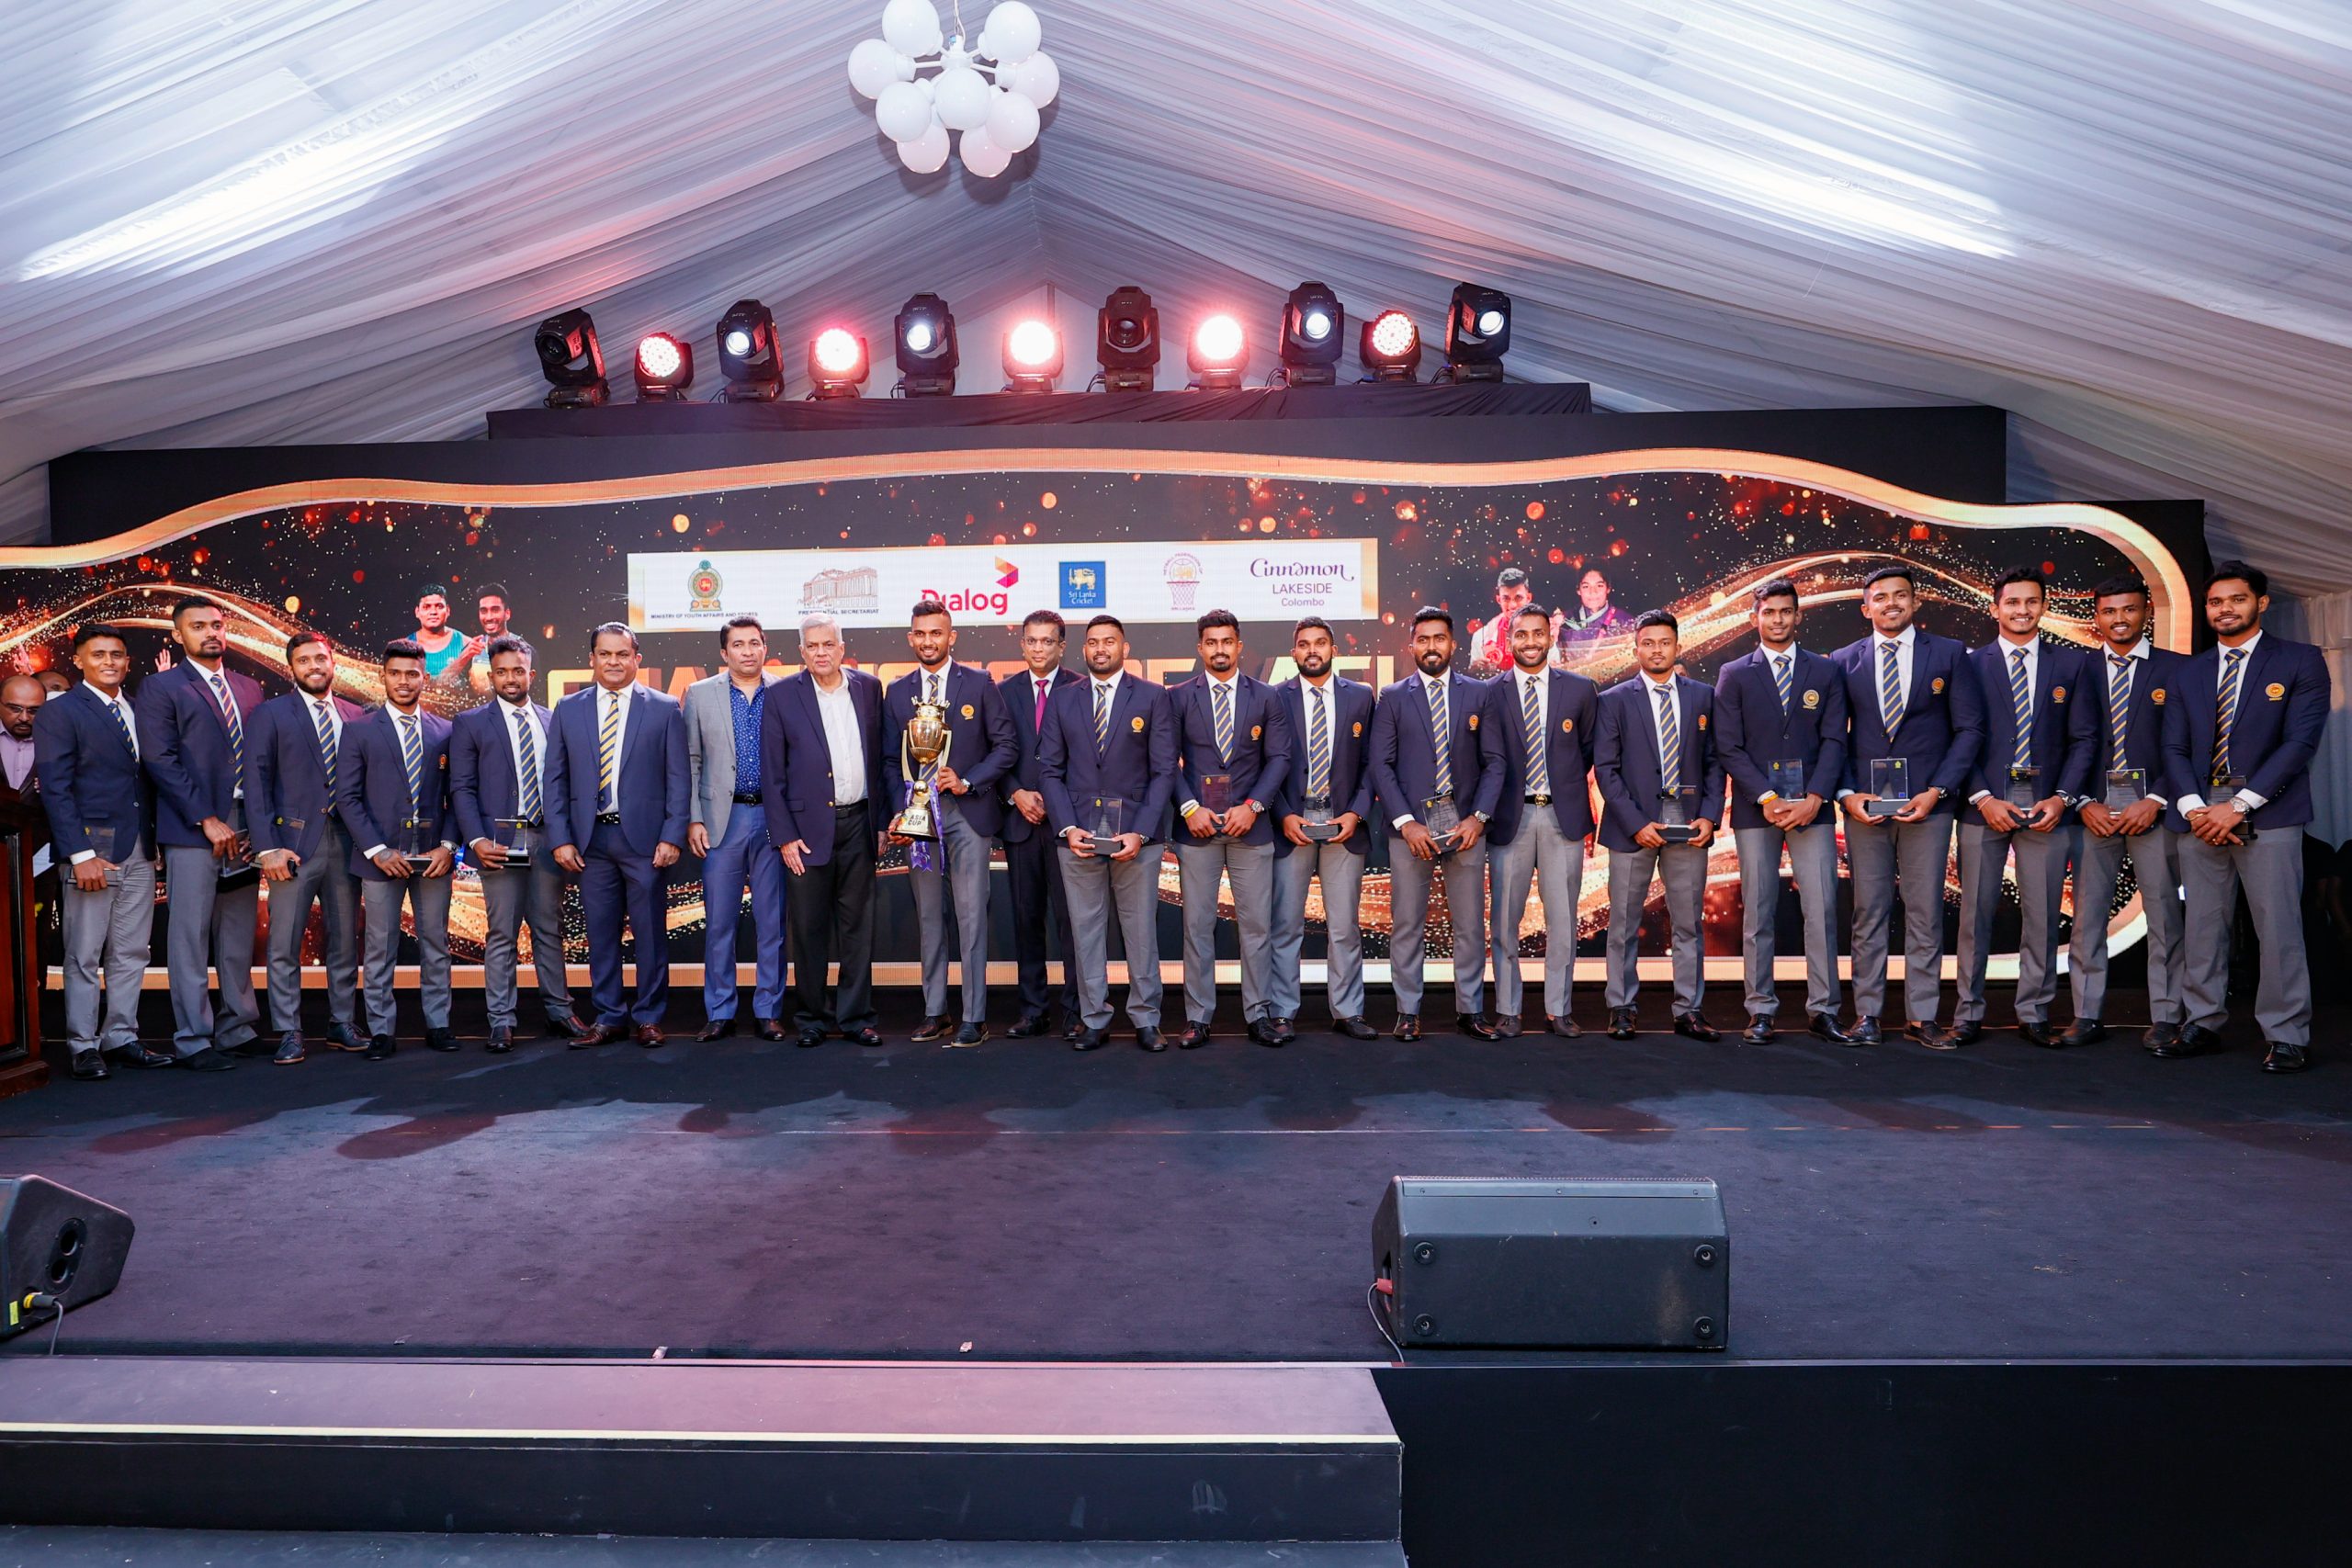 Cricket, Netball, Commonwealth medalists who made Sri Lanka the best in Asia felicitated by the President